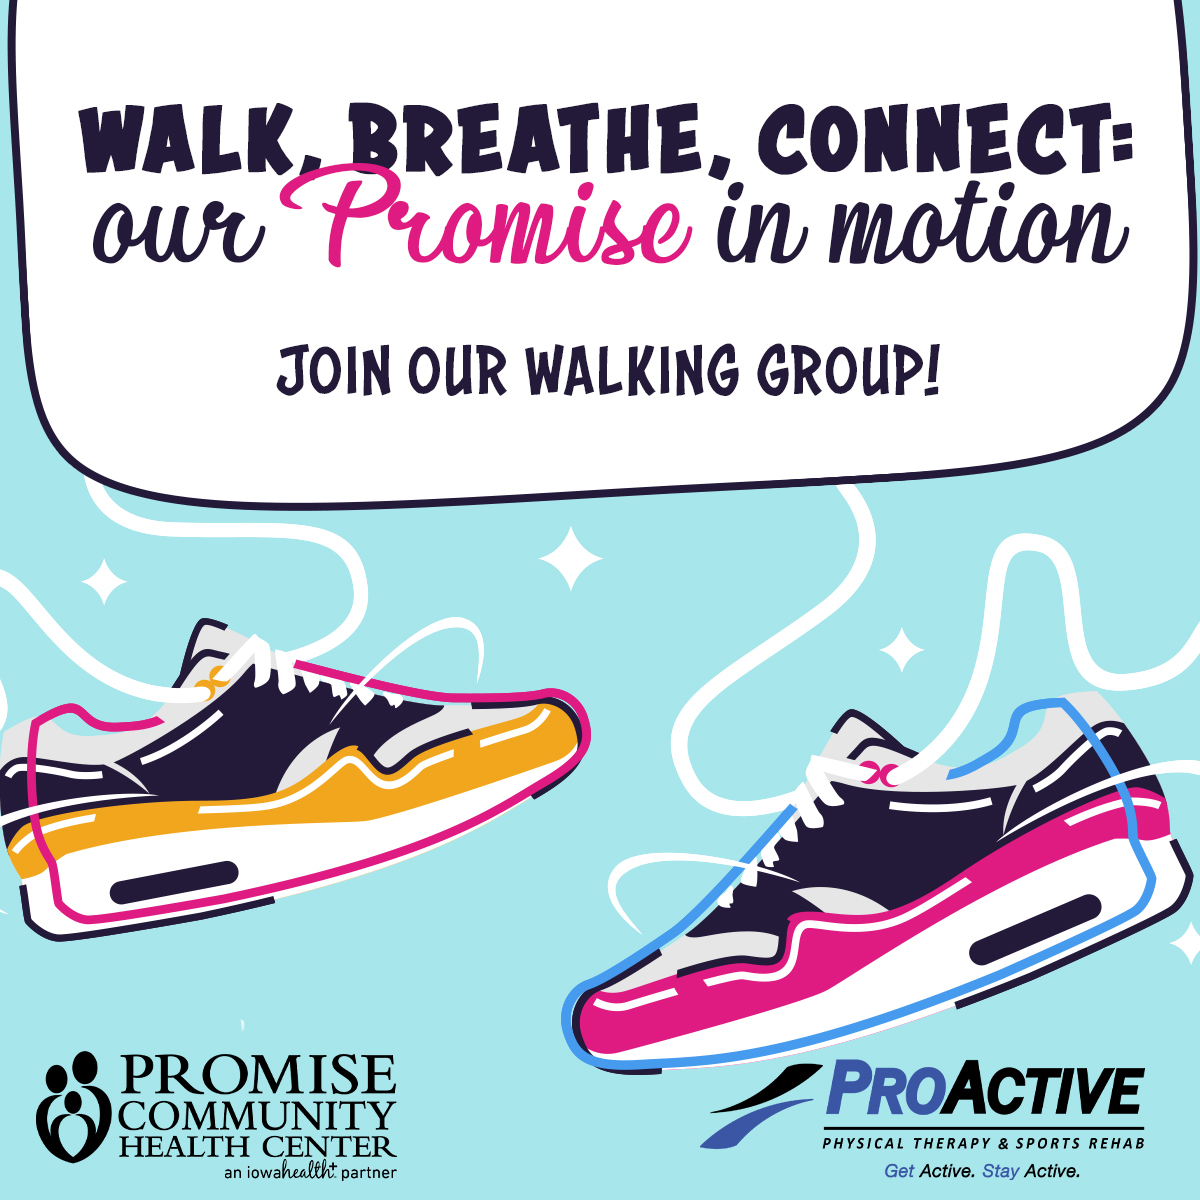 Sioux Center Walking Group, Population Health Manager at Promise Community Health Center in northwest Iowa